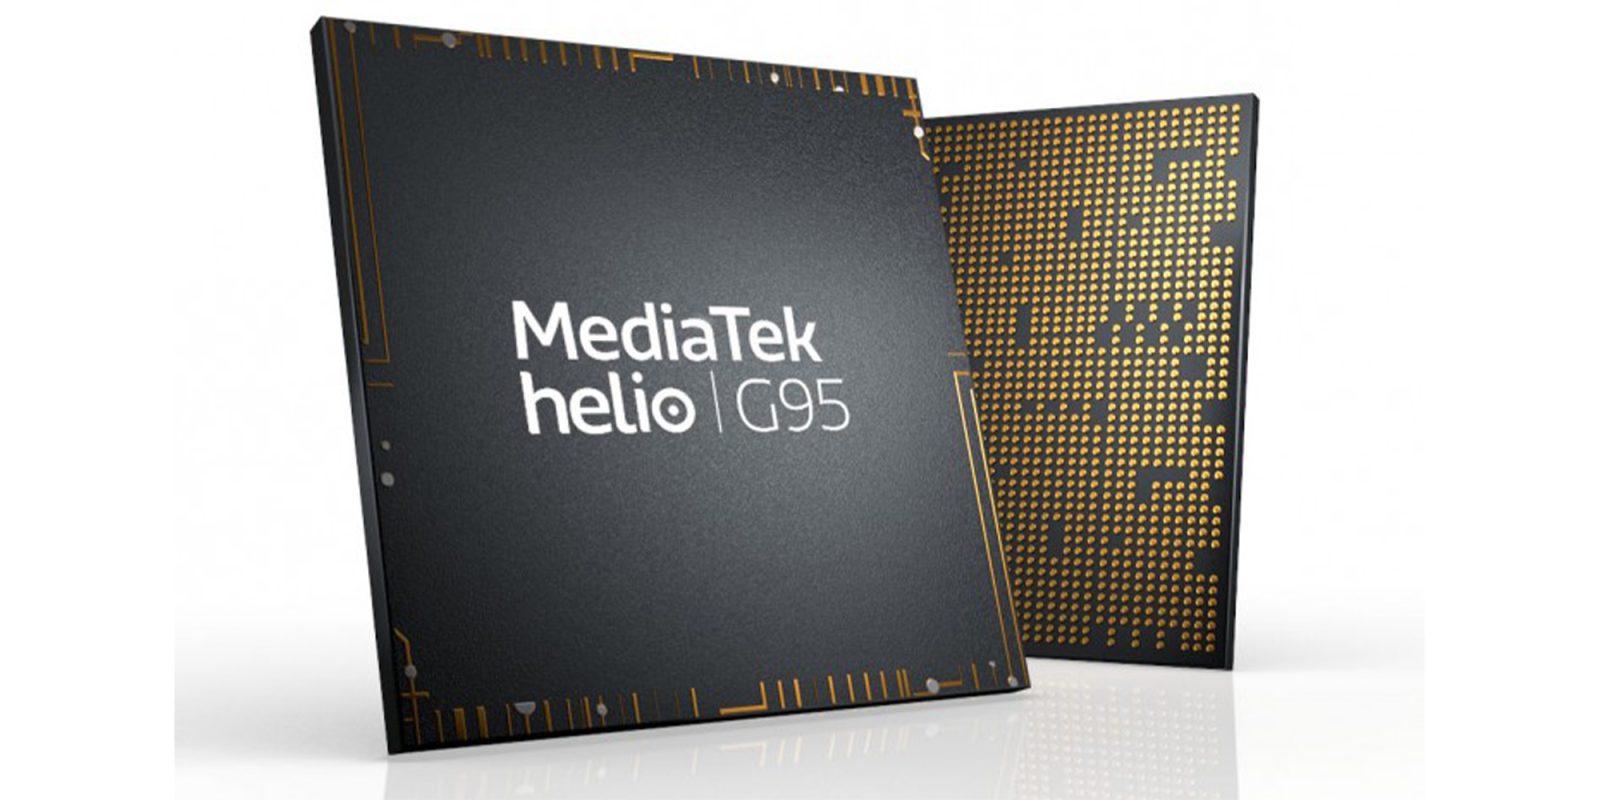 MediaTek unveils the Helio G95, an affordable gaming chip - 9to5Google